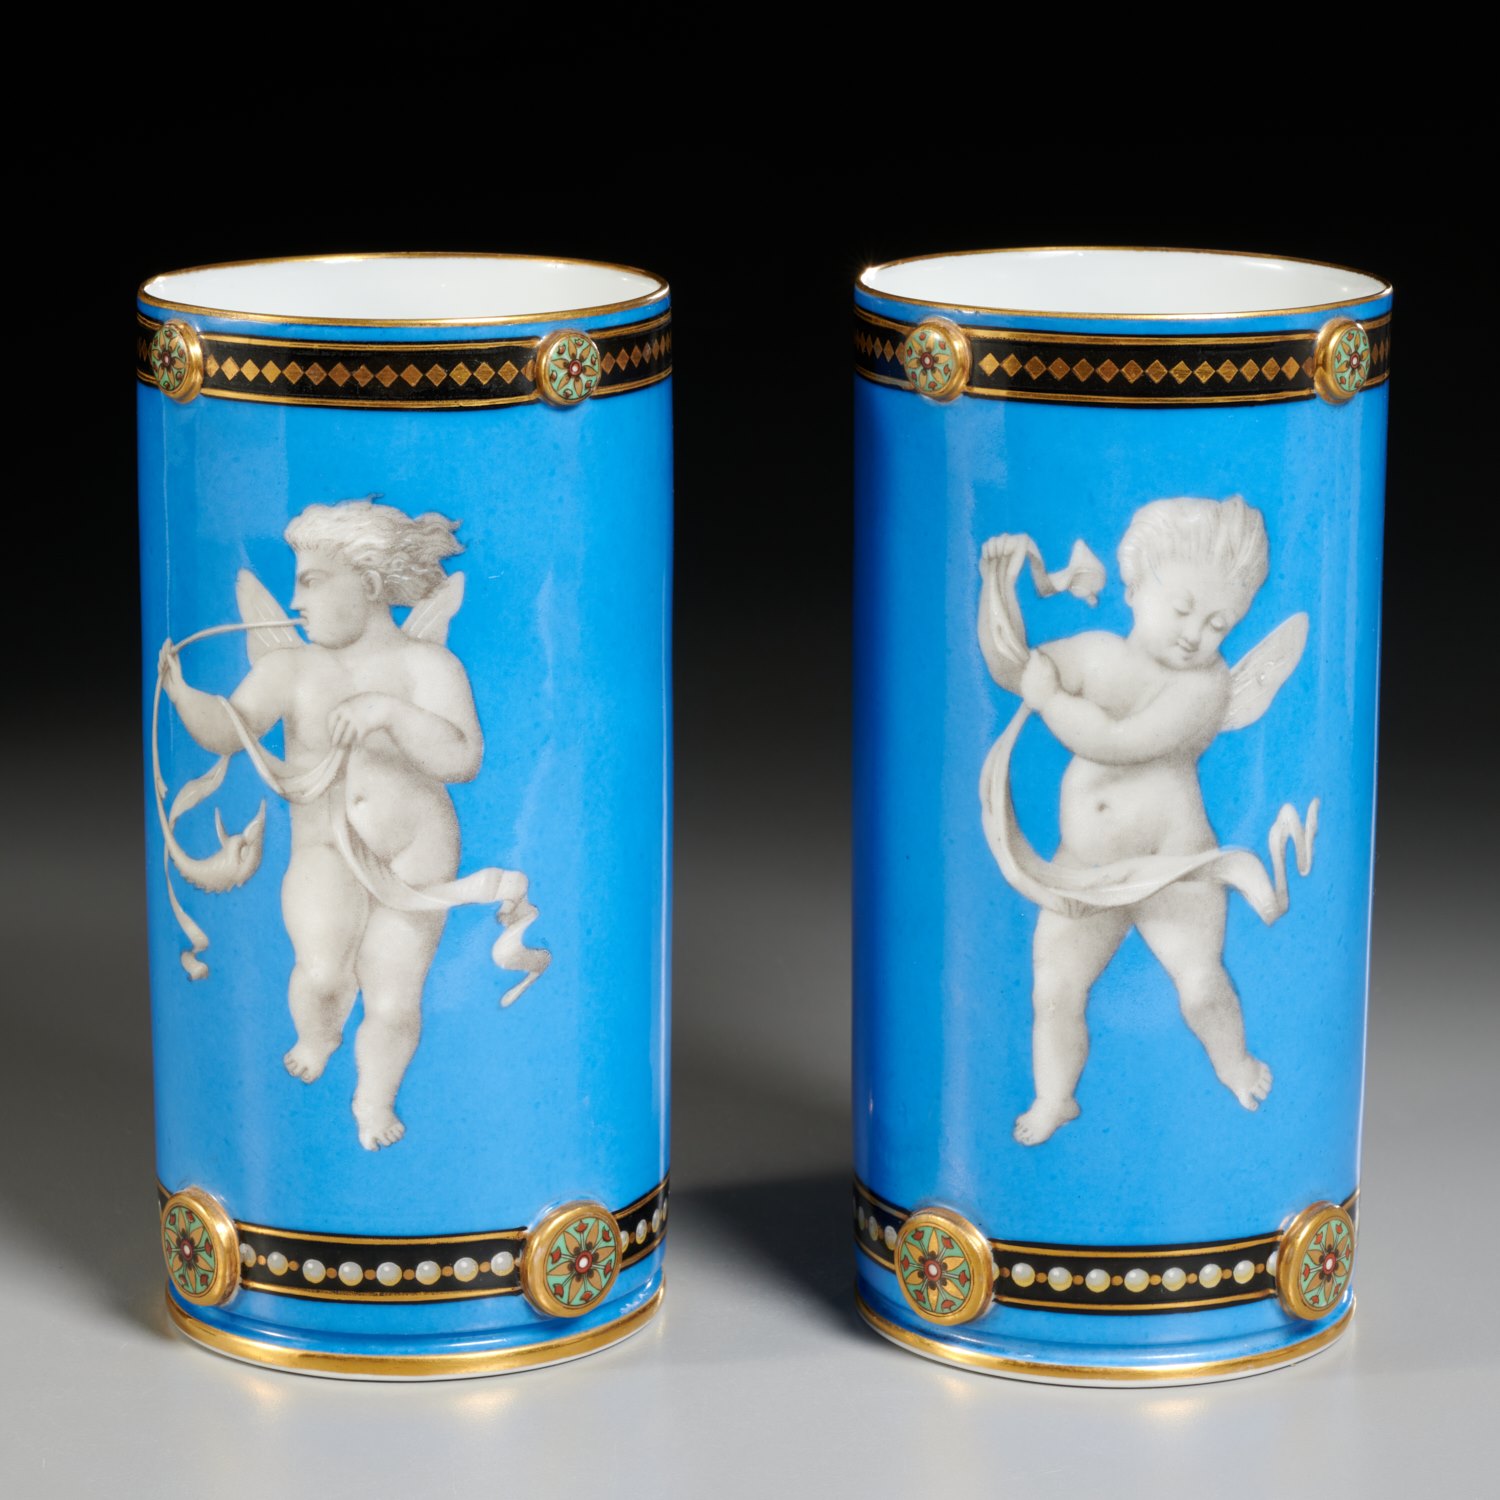 PAIR VIENNA PORCELAIN STYLE CYLINDRICAL